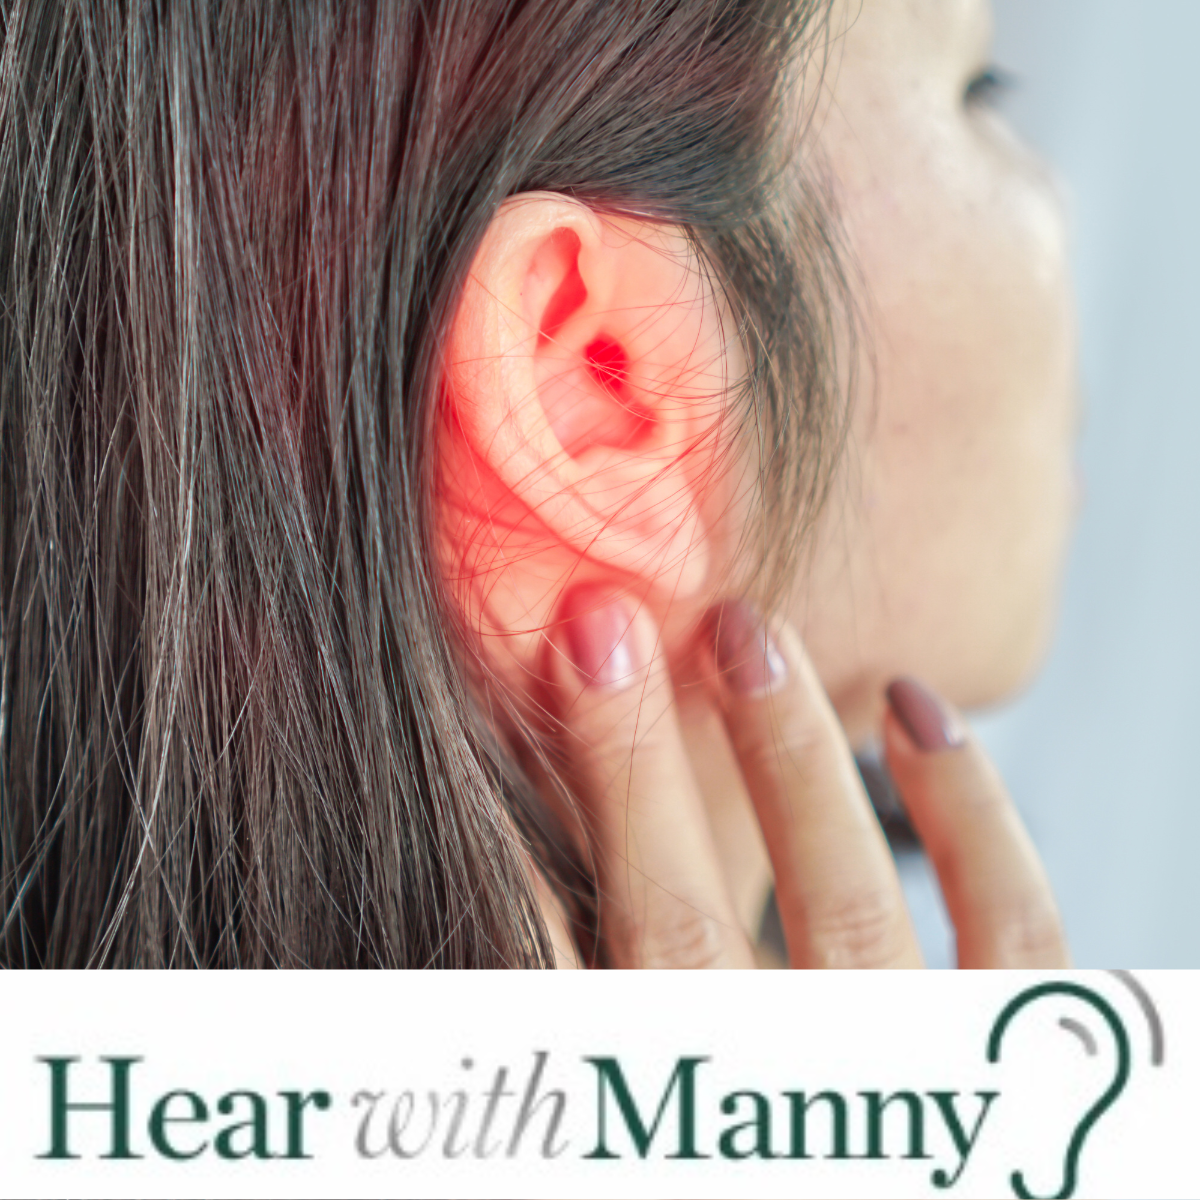 woman with a glowing red ear